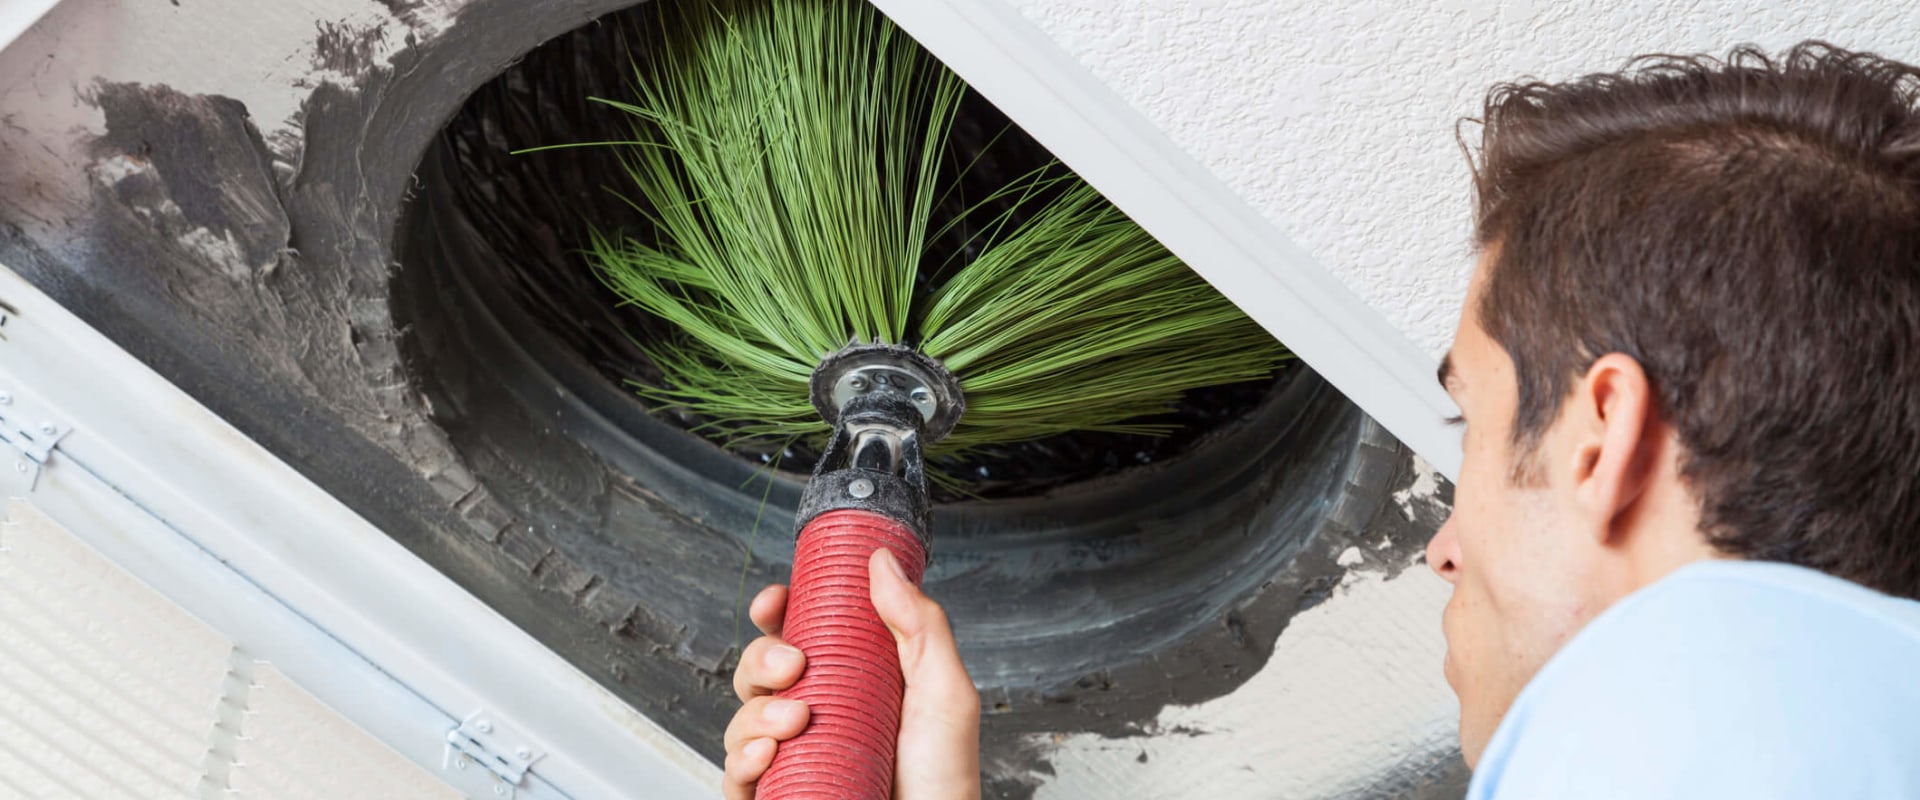 Finding the Best Vent Cleaning Service in Davie, FL